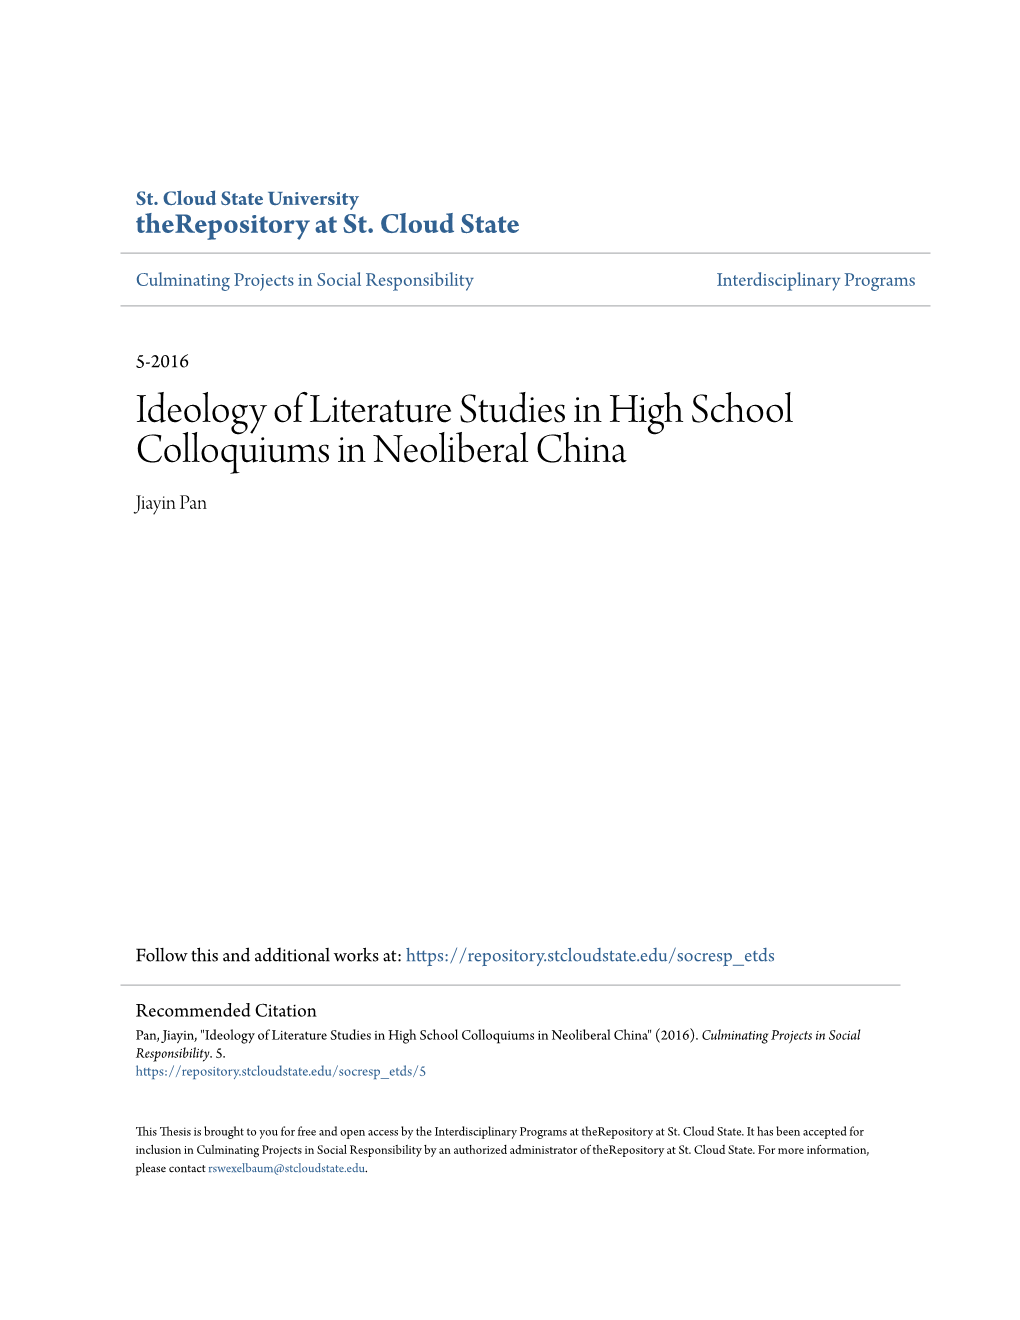 Ideology of Literature Studies in High School Colloquiums in Neoliberal China Jiayin Pan